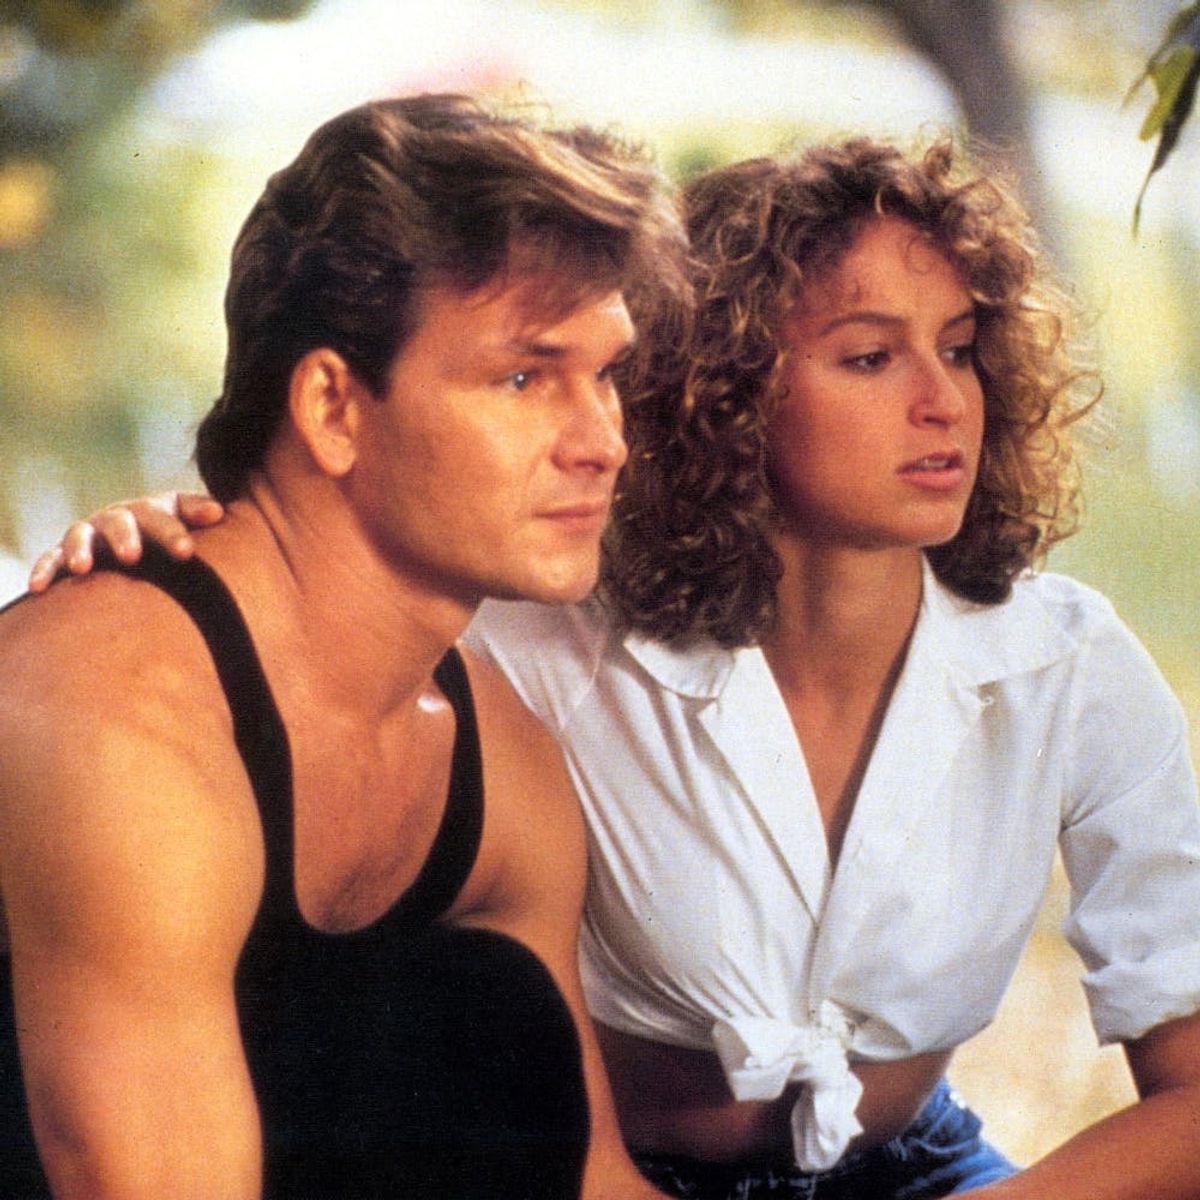 You’ll Either LOVE or HATE the New Dirty Dancing Pics